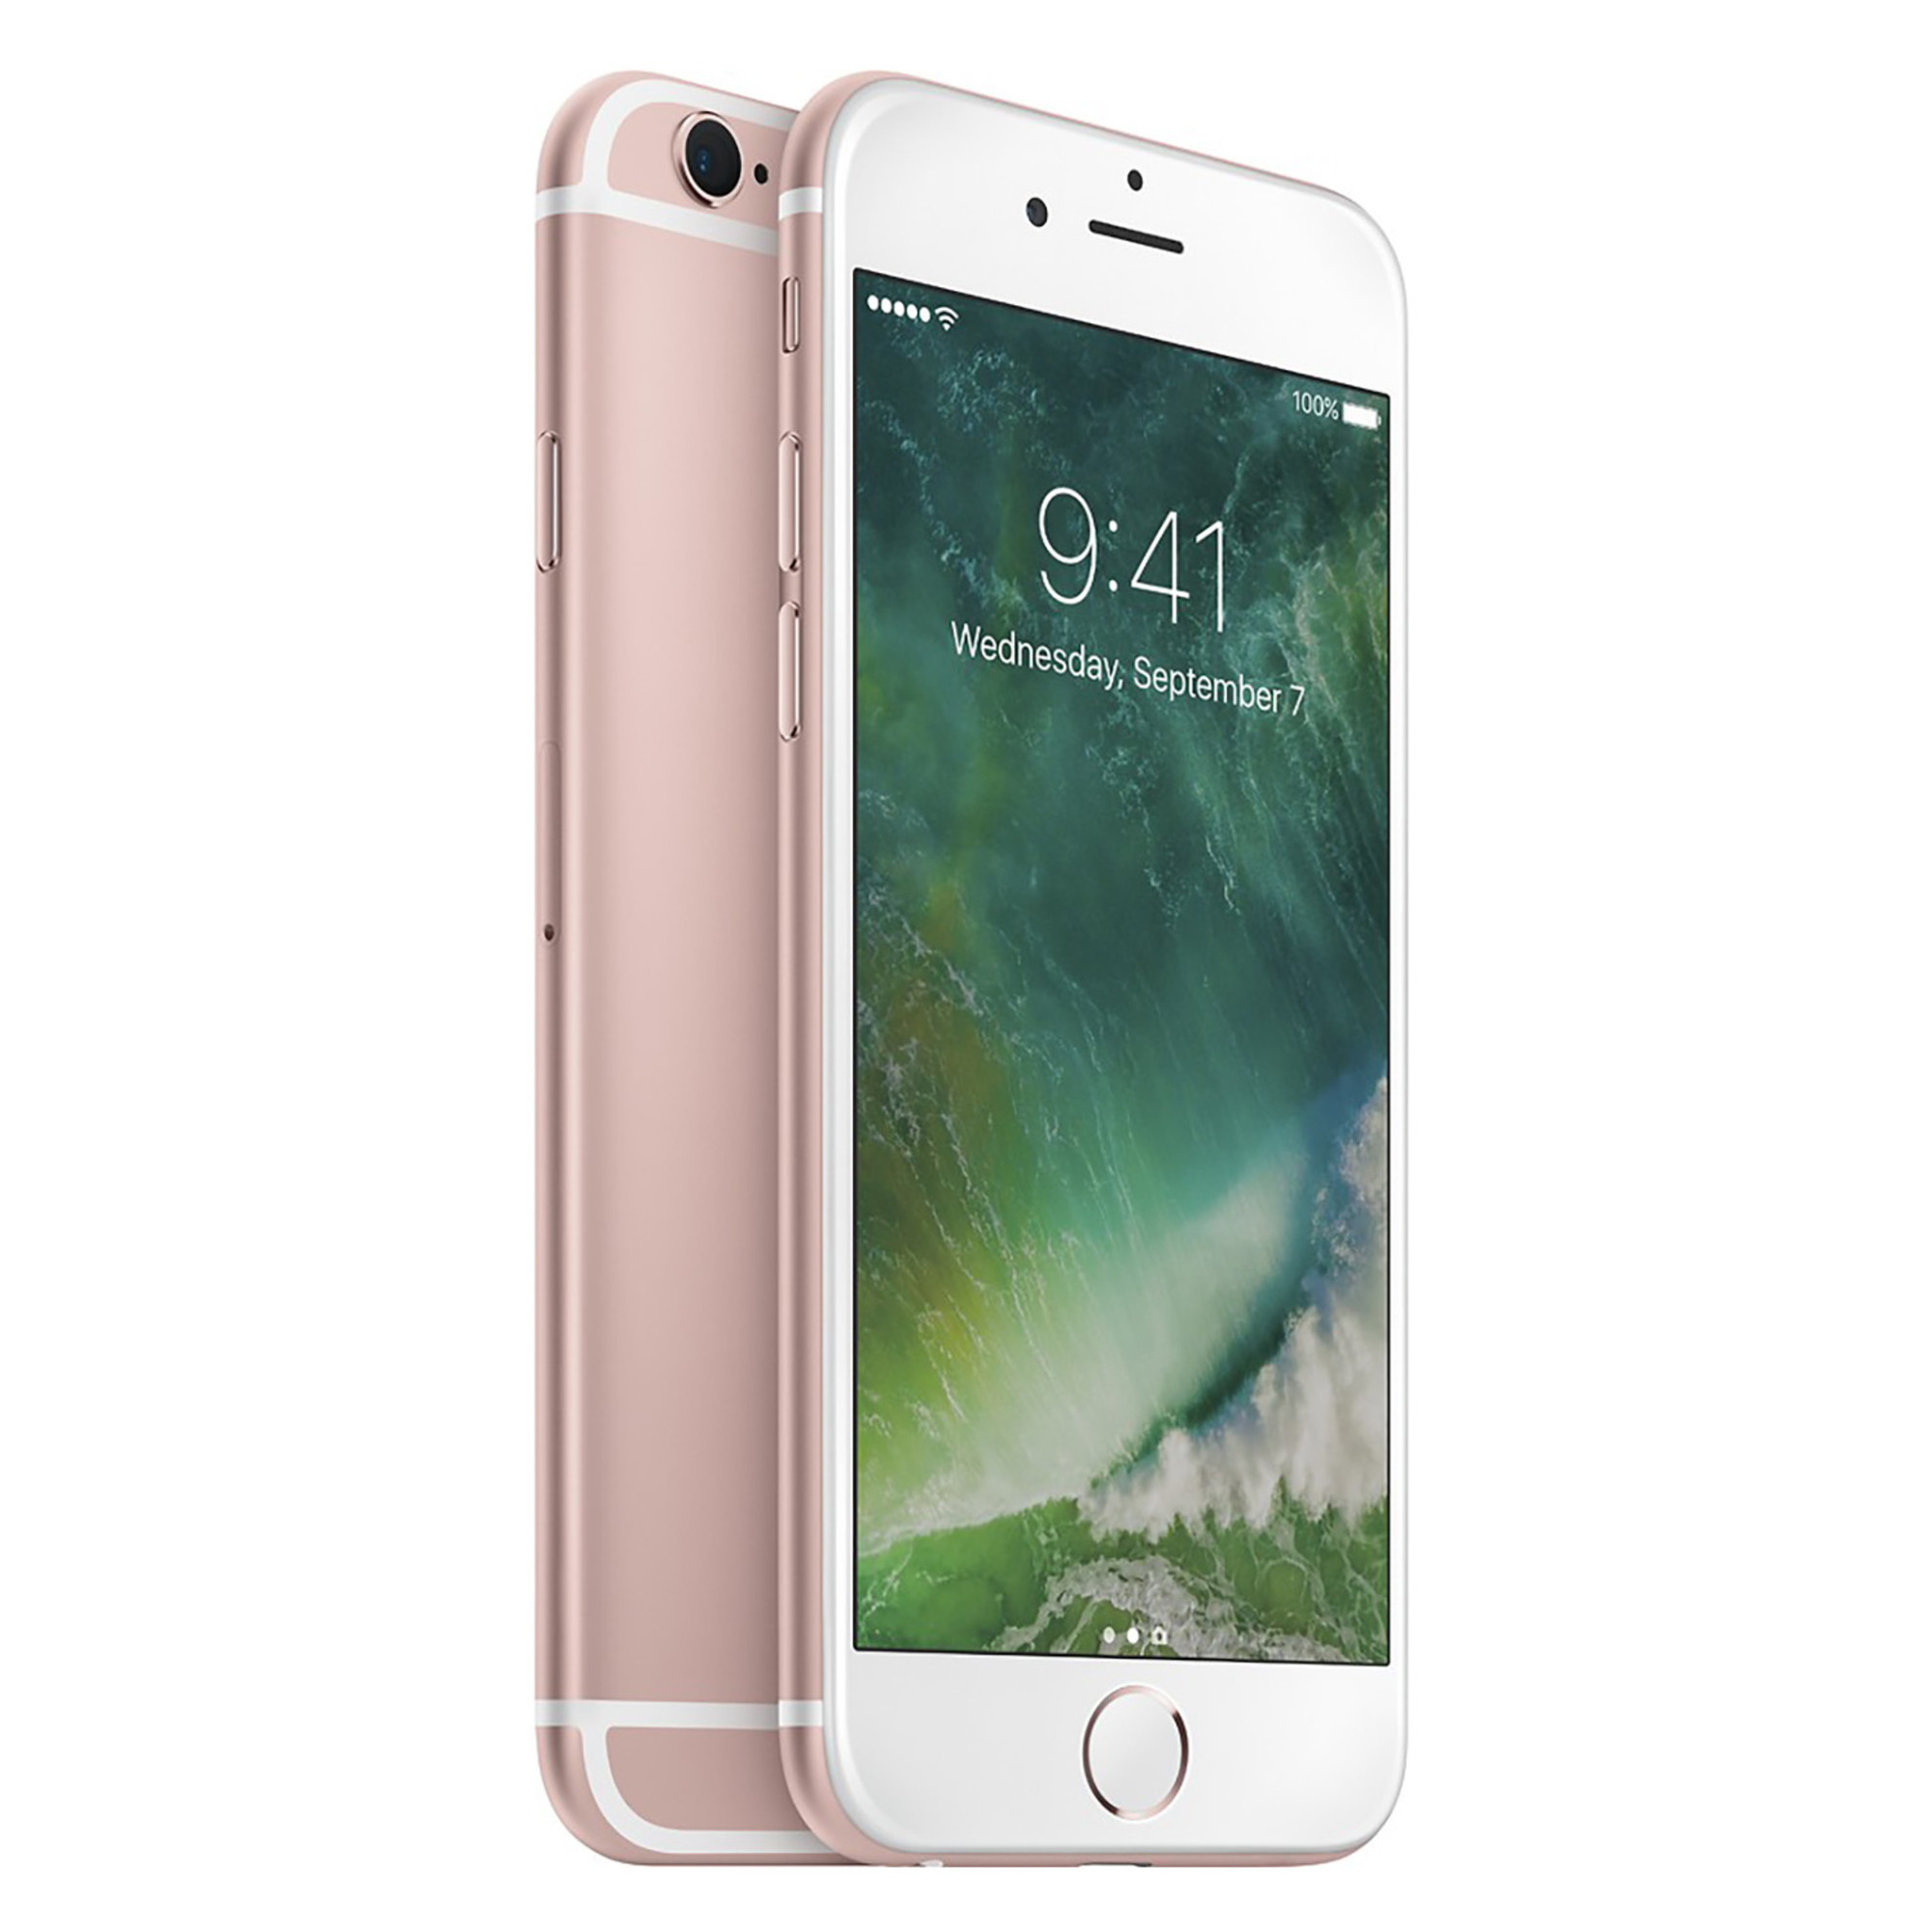 Pre-Owned Apple iPhone 6s 128GB GSM Phone - Rose Gold + WeCare Alcohol Wipes Pack (50 Wipes) (Refurbished: Good) - image 1 of 6